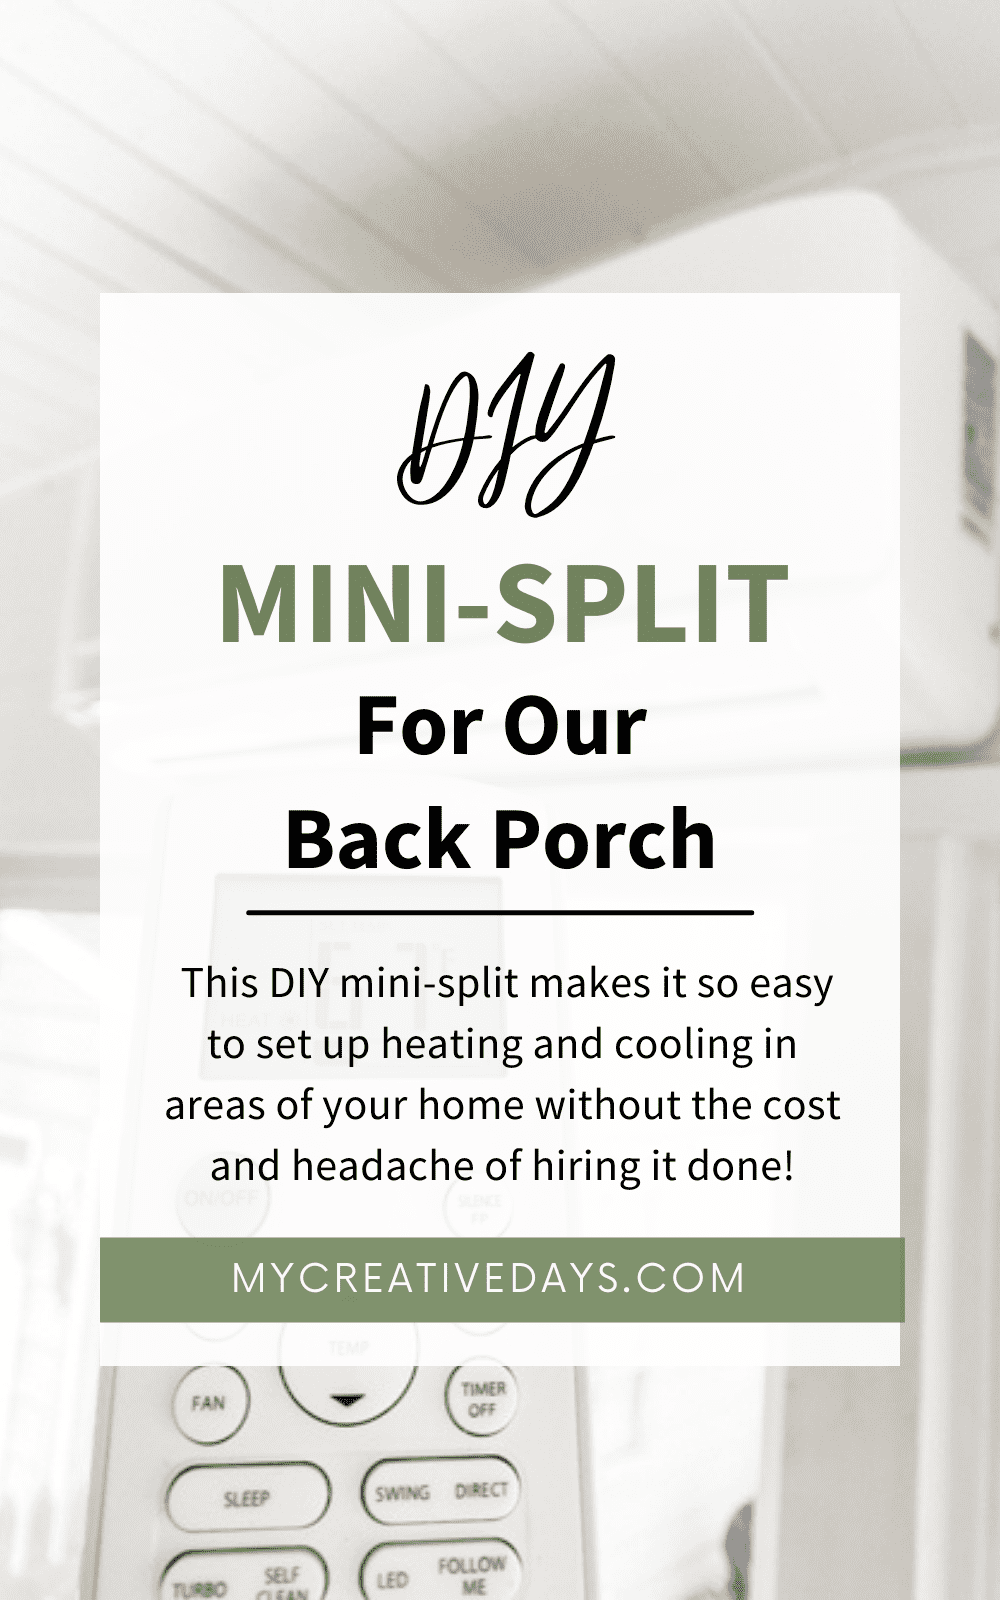 This DIY mini-split from Mr. Cool makes it so easy to set up heating and cooling in areas of your home on your own!